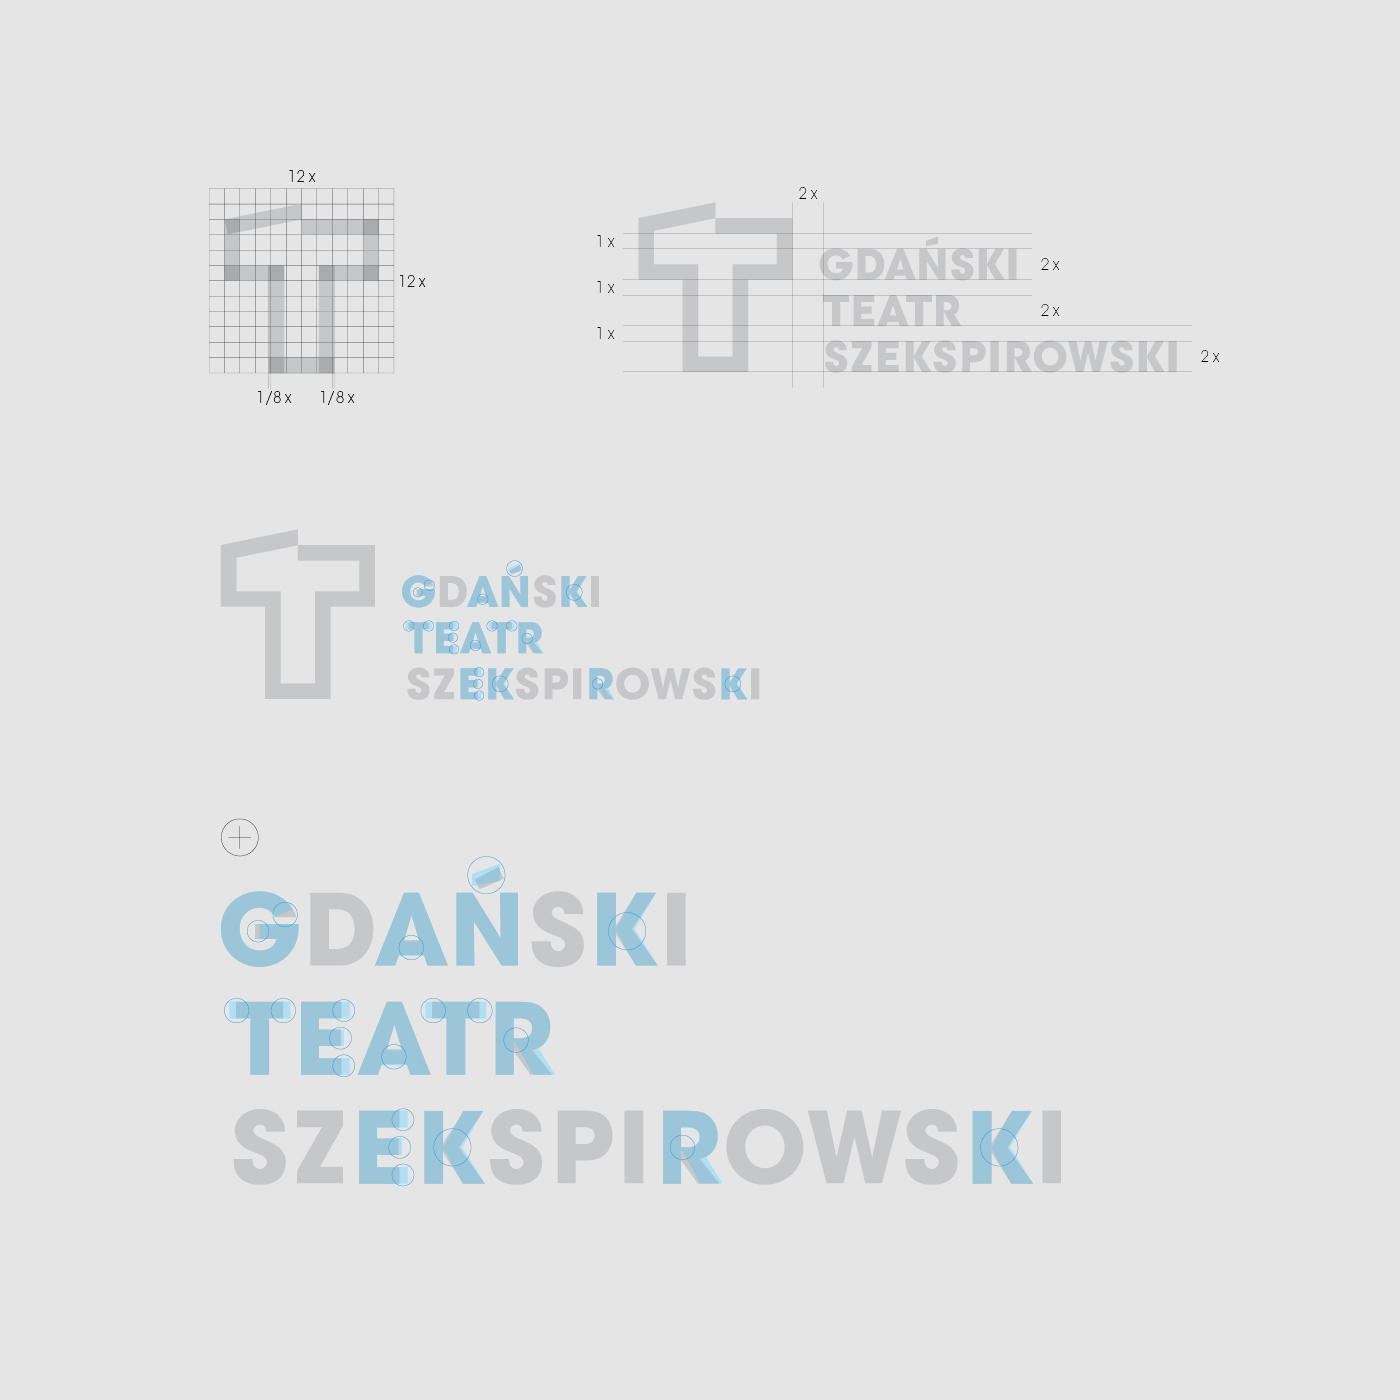 shakespeare Theatre culture culture project  icons Gdansk theater 